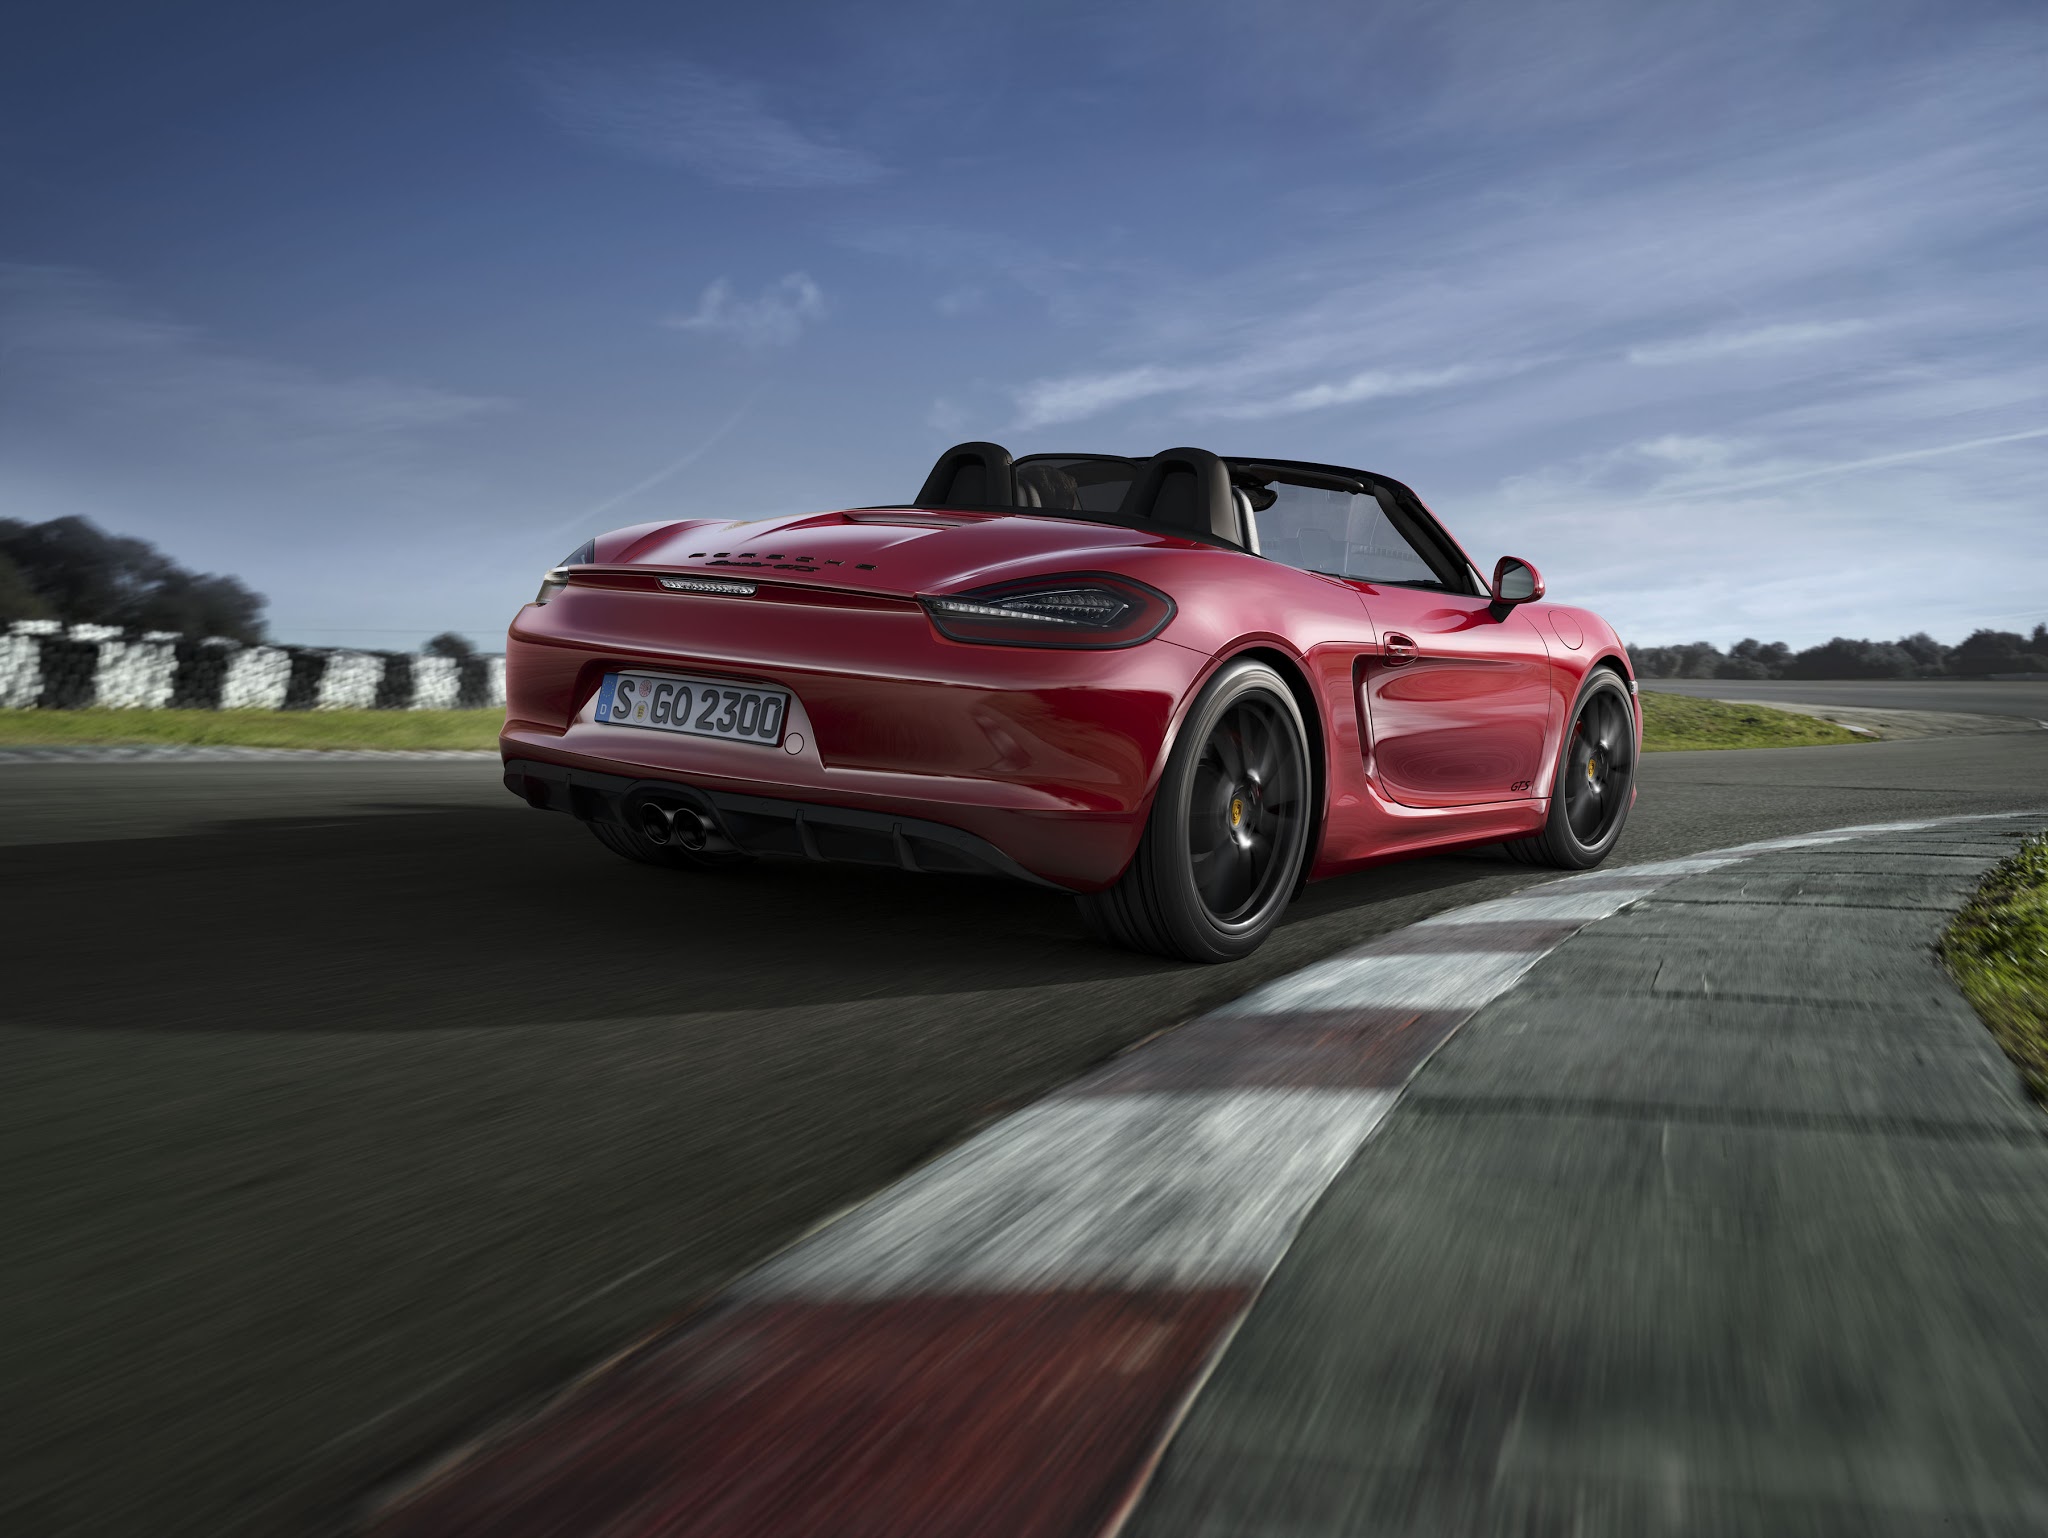 Granny Caught Doing Nearly 150MPH in Her Boxster!